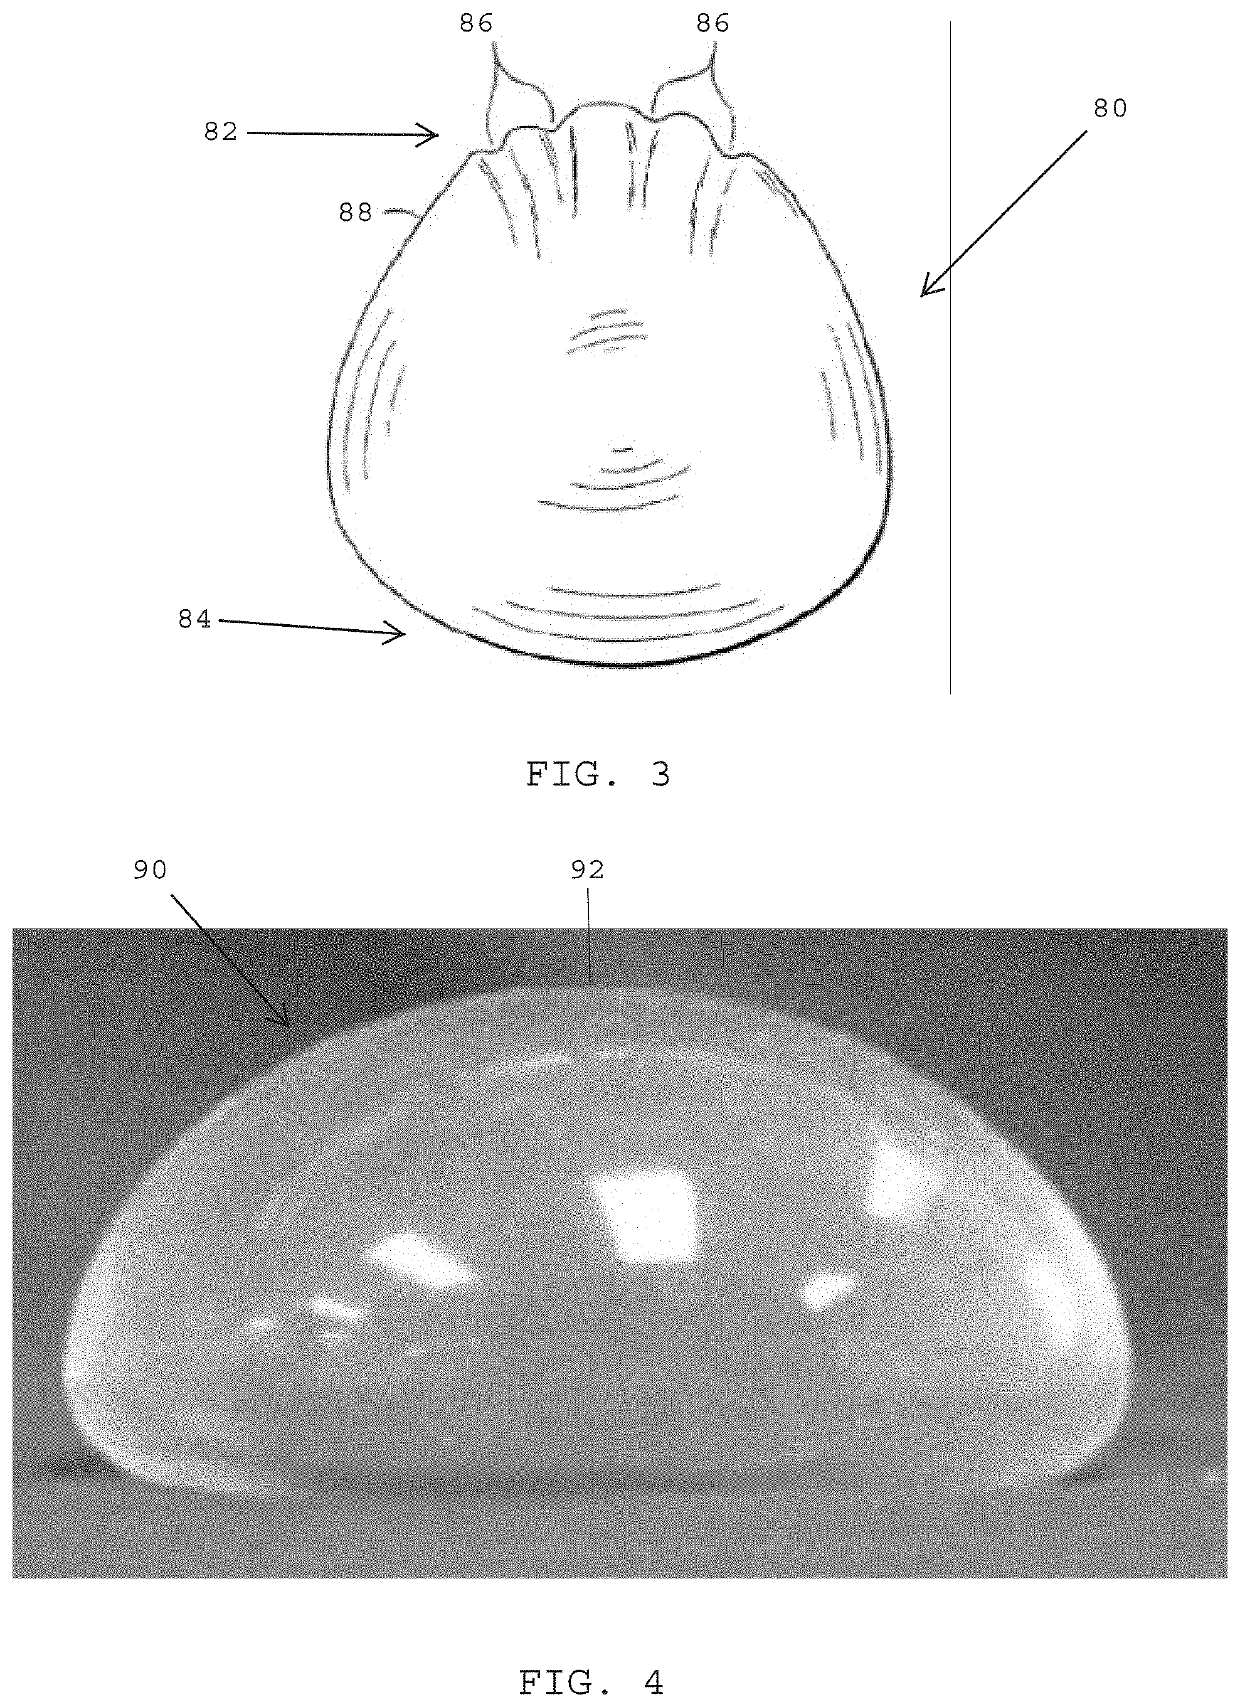 Systems, devices and methods of making mammary implants and tissue expanders having ribbed shells